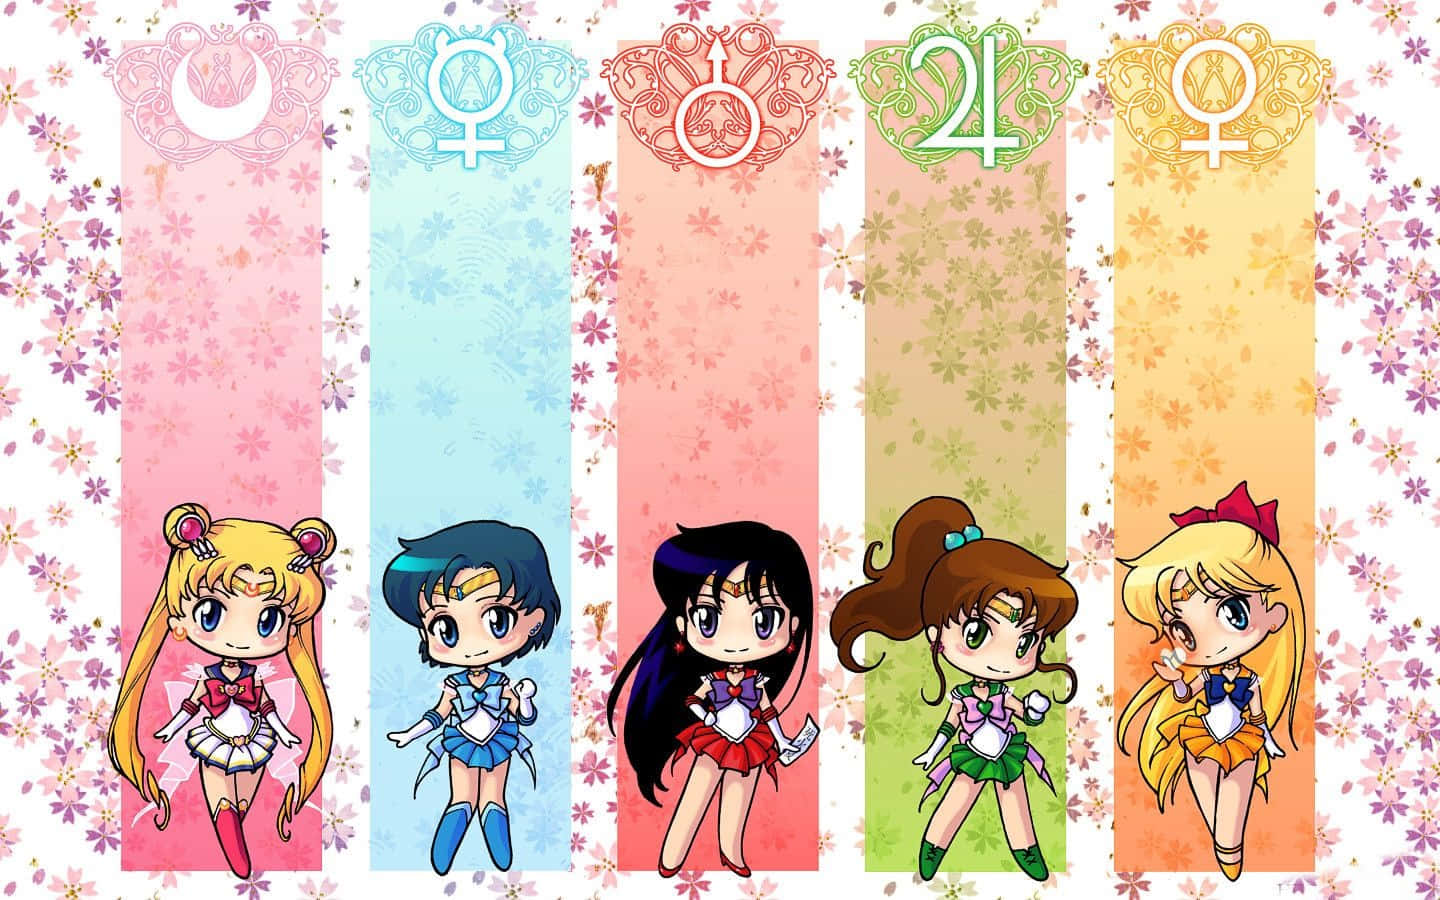 Two magical girls united by friendship Wallpaper